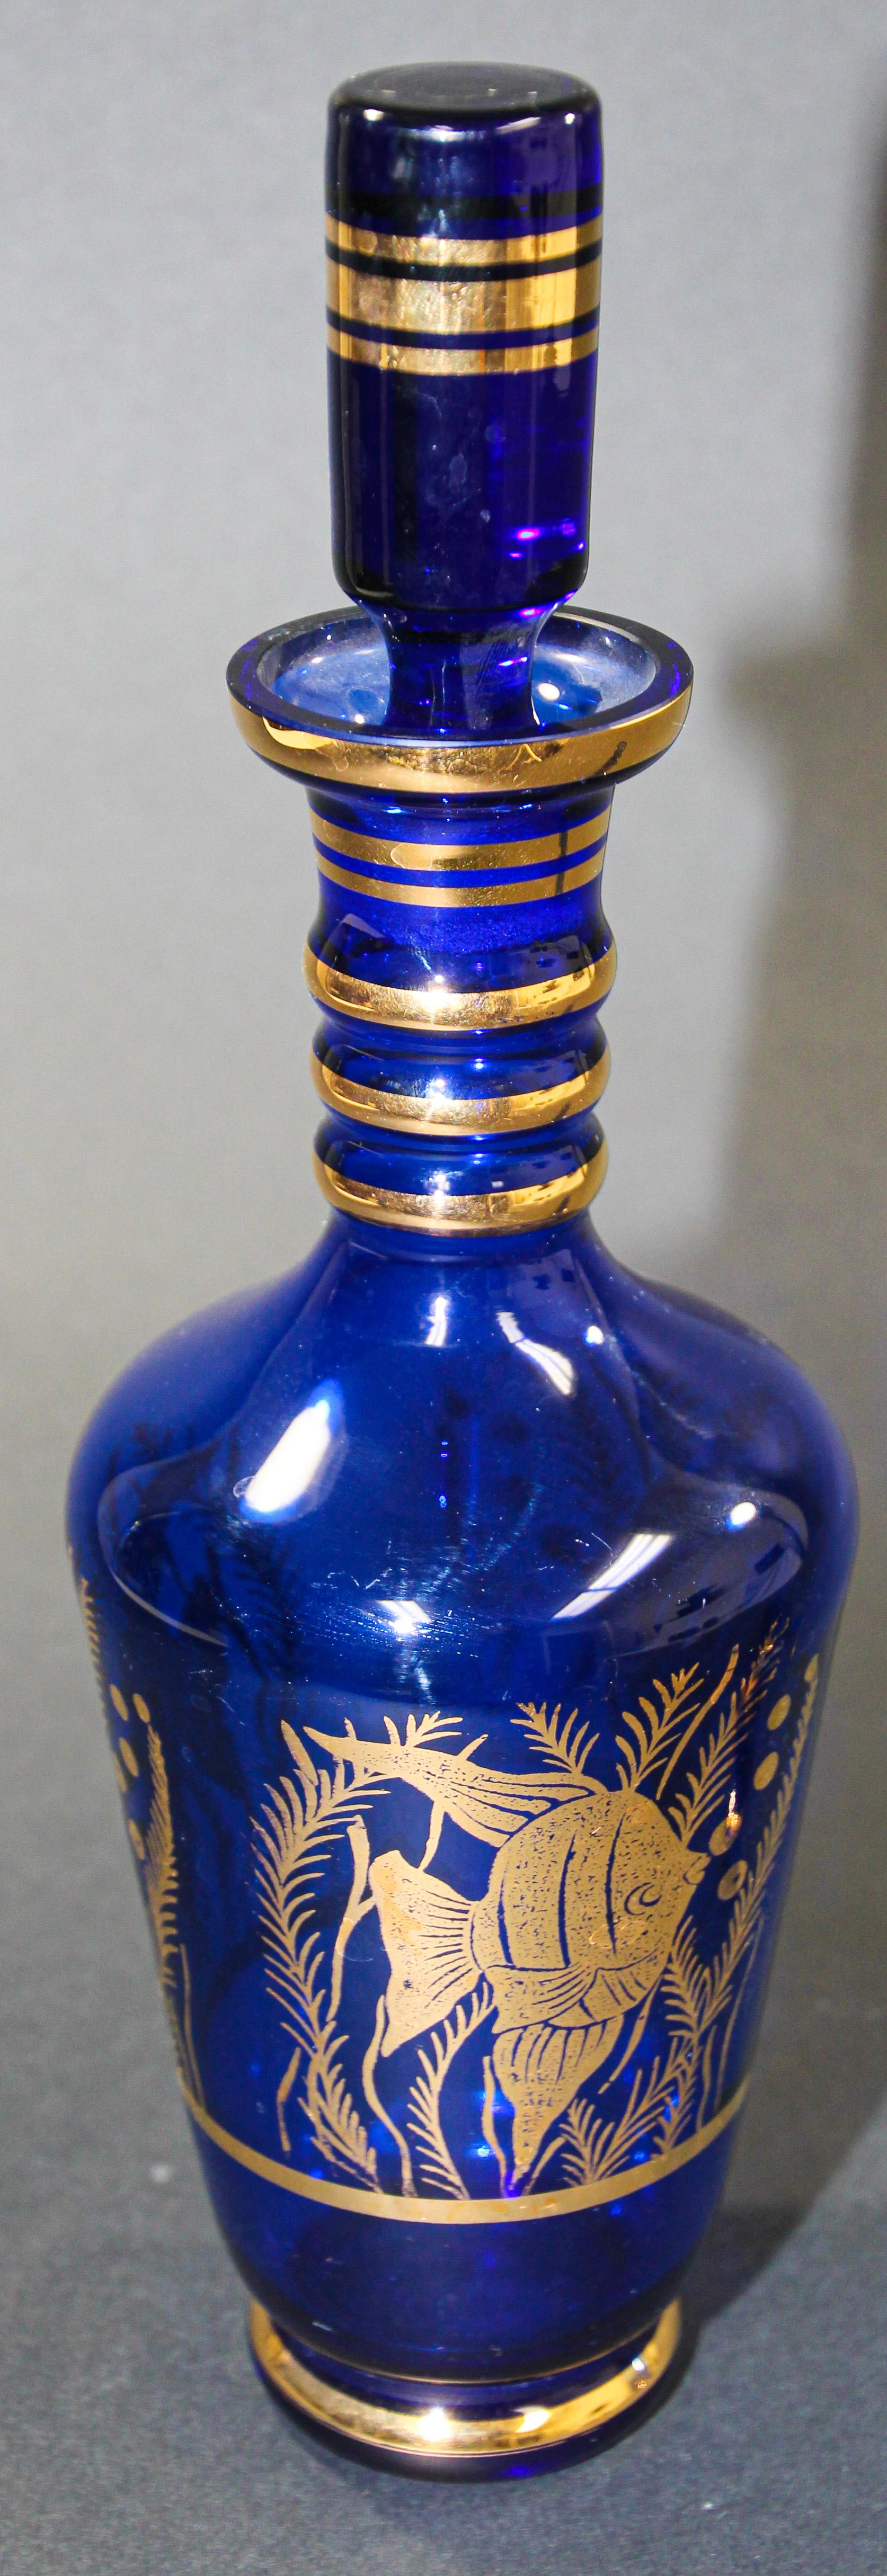 Hand-Crafted Cobalt Blue Enameled Glass Liquor Set Decanter and Glasses For Sale